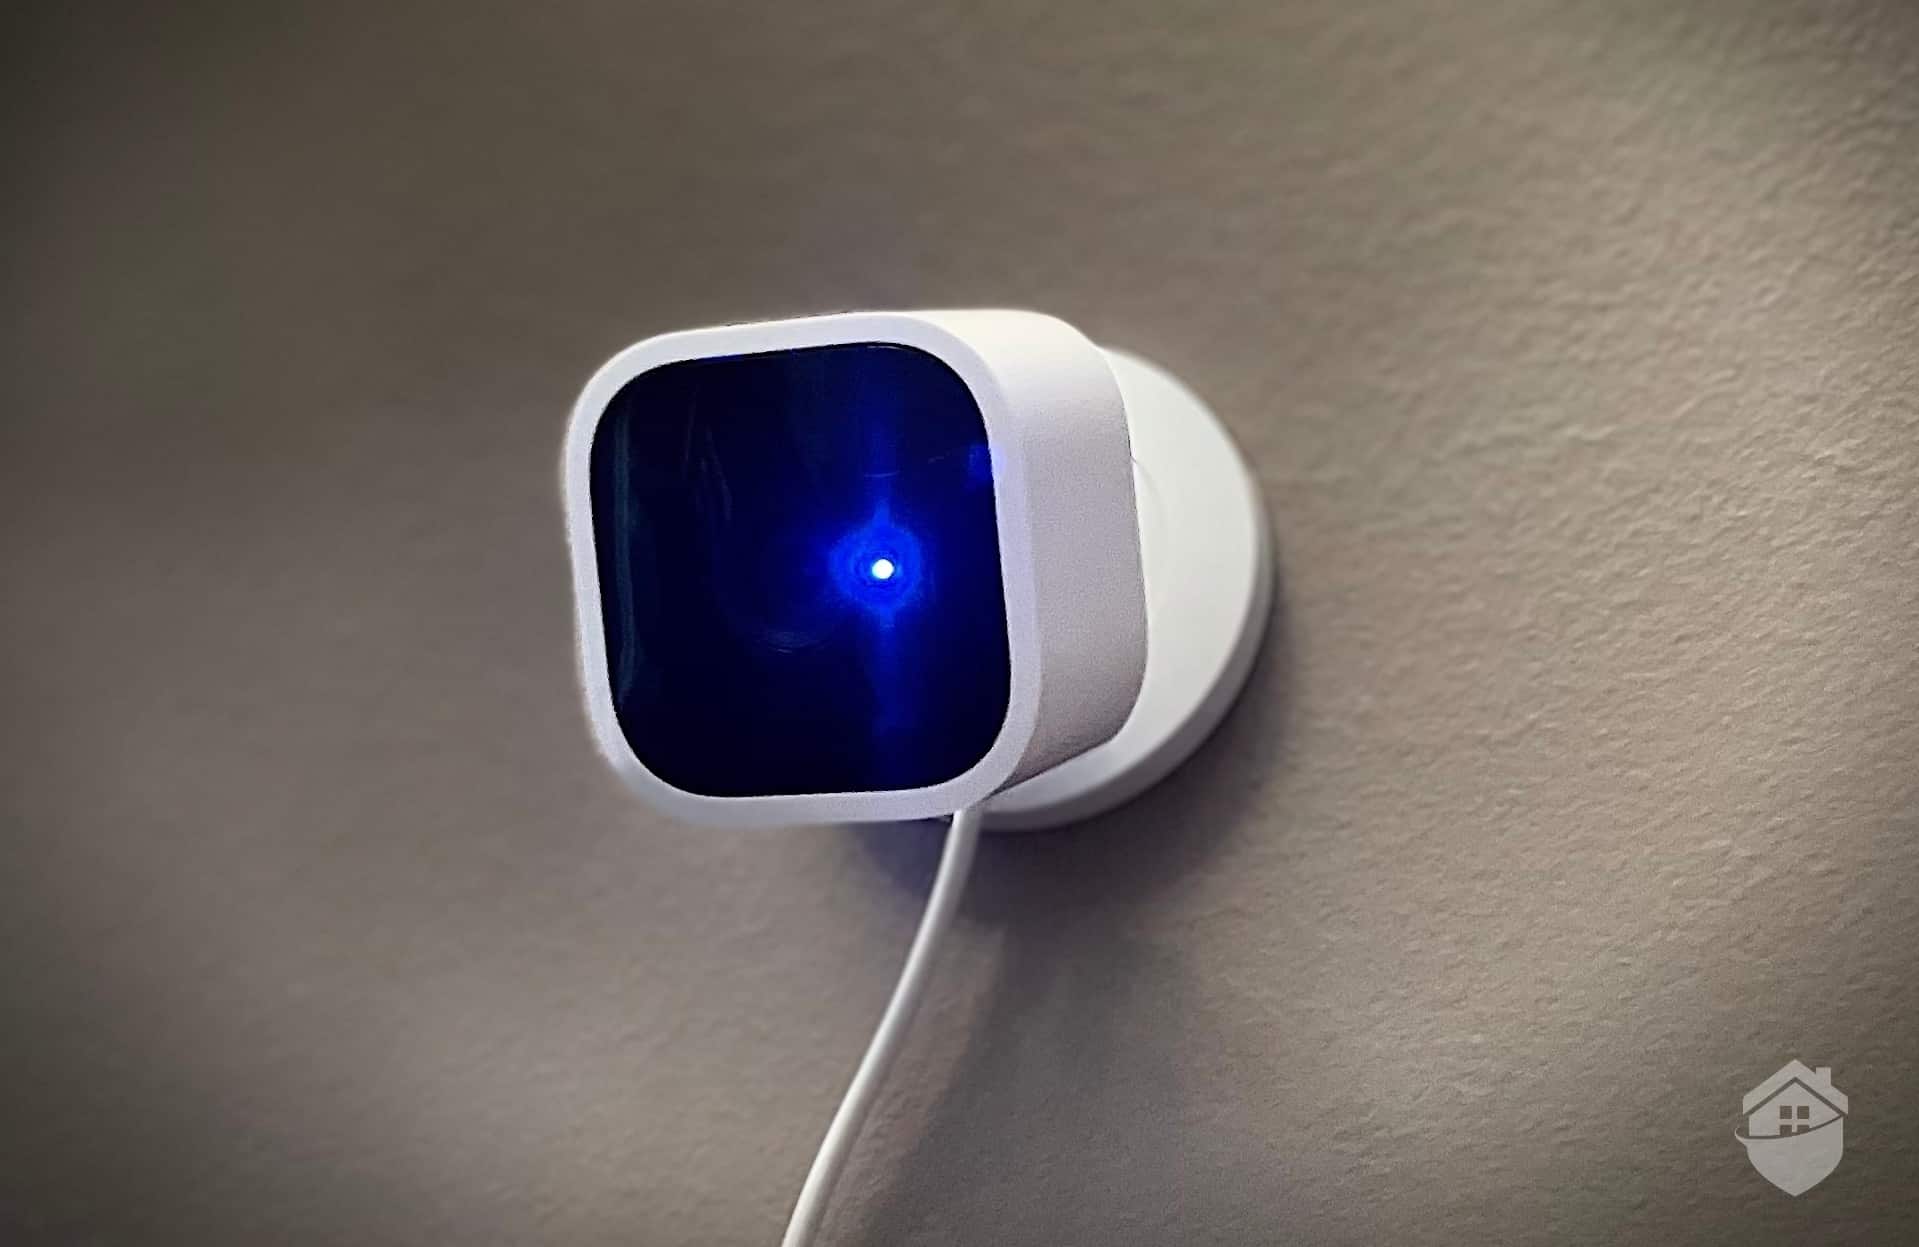 Blink Mini review: a home security camera with some strings